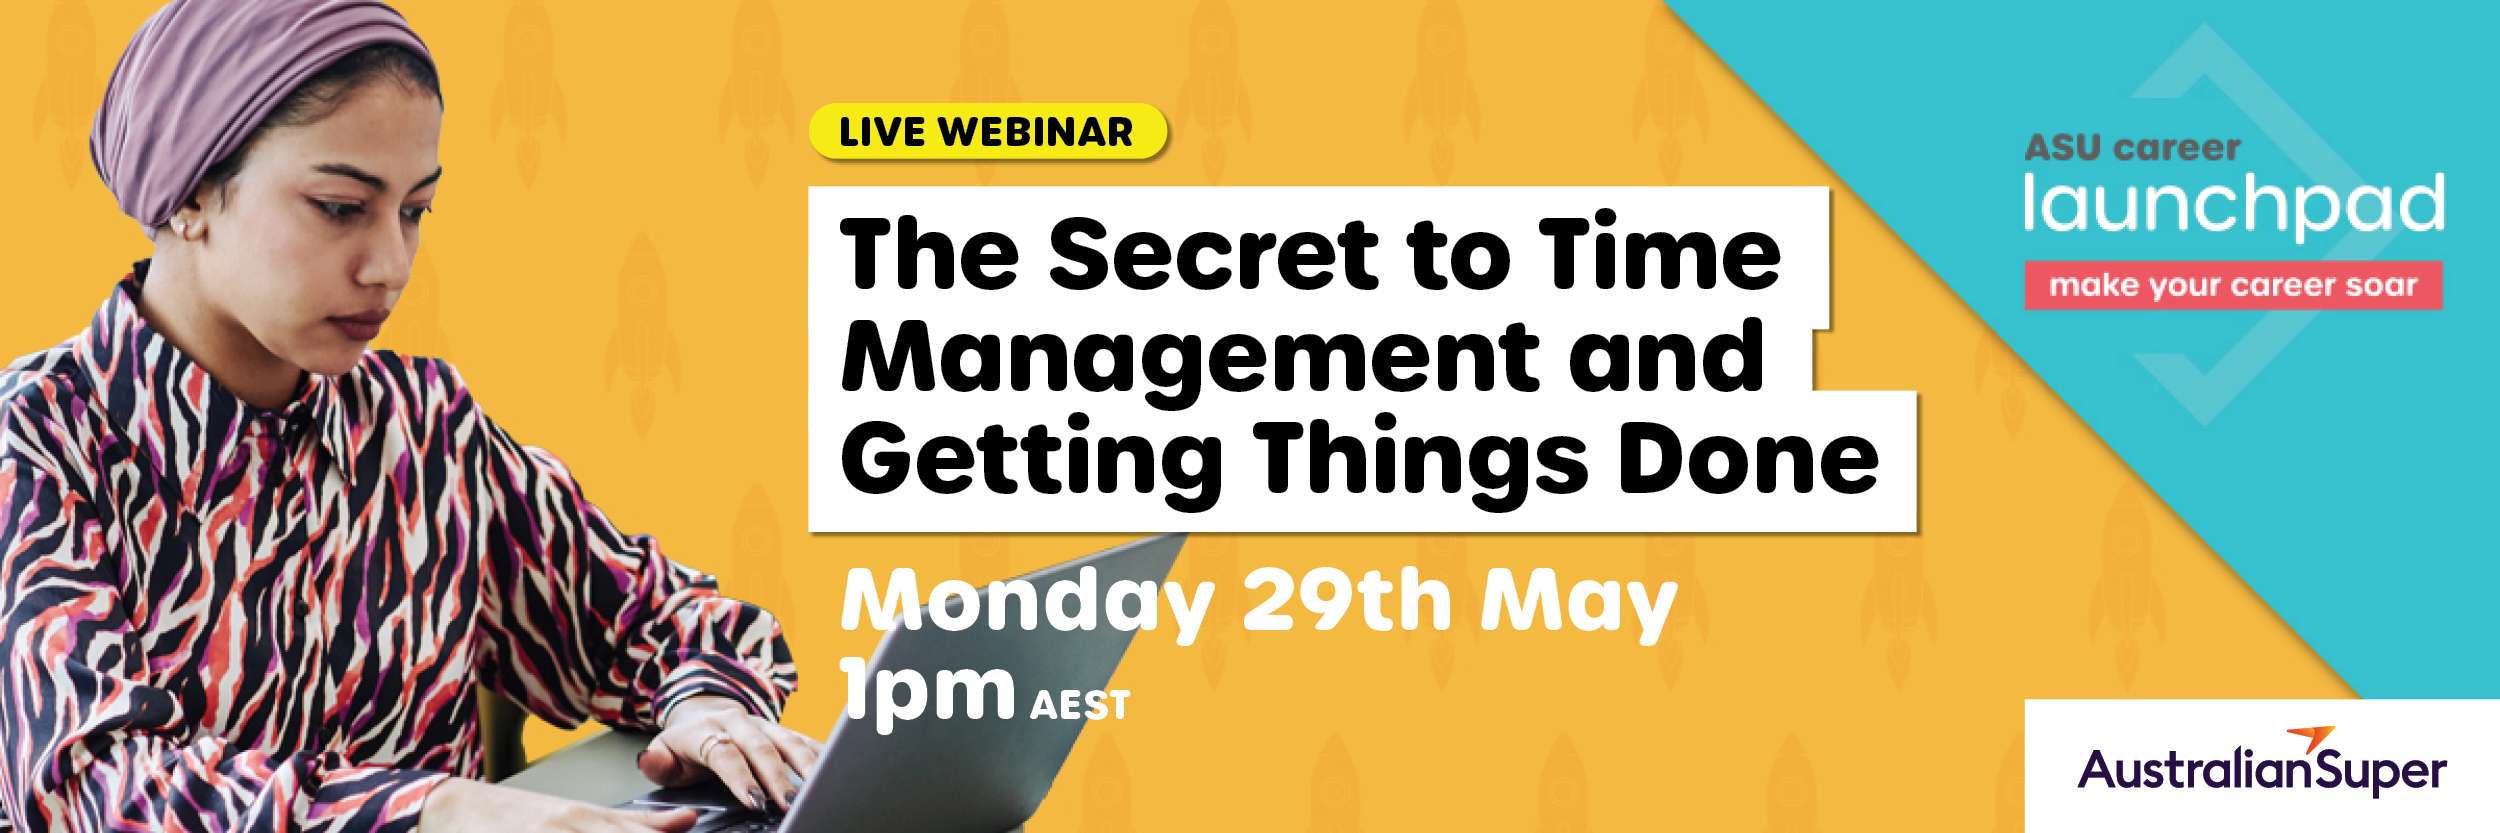 The Secret to Time Management and Getting Things Done. Monday 29 May.